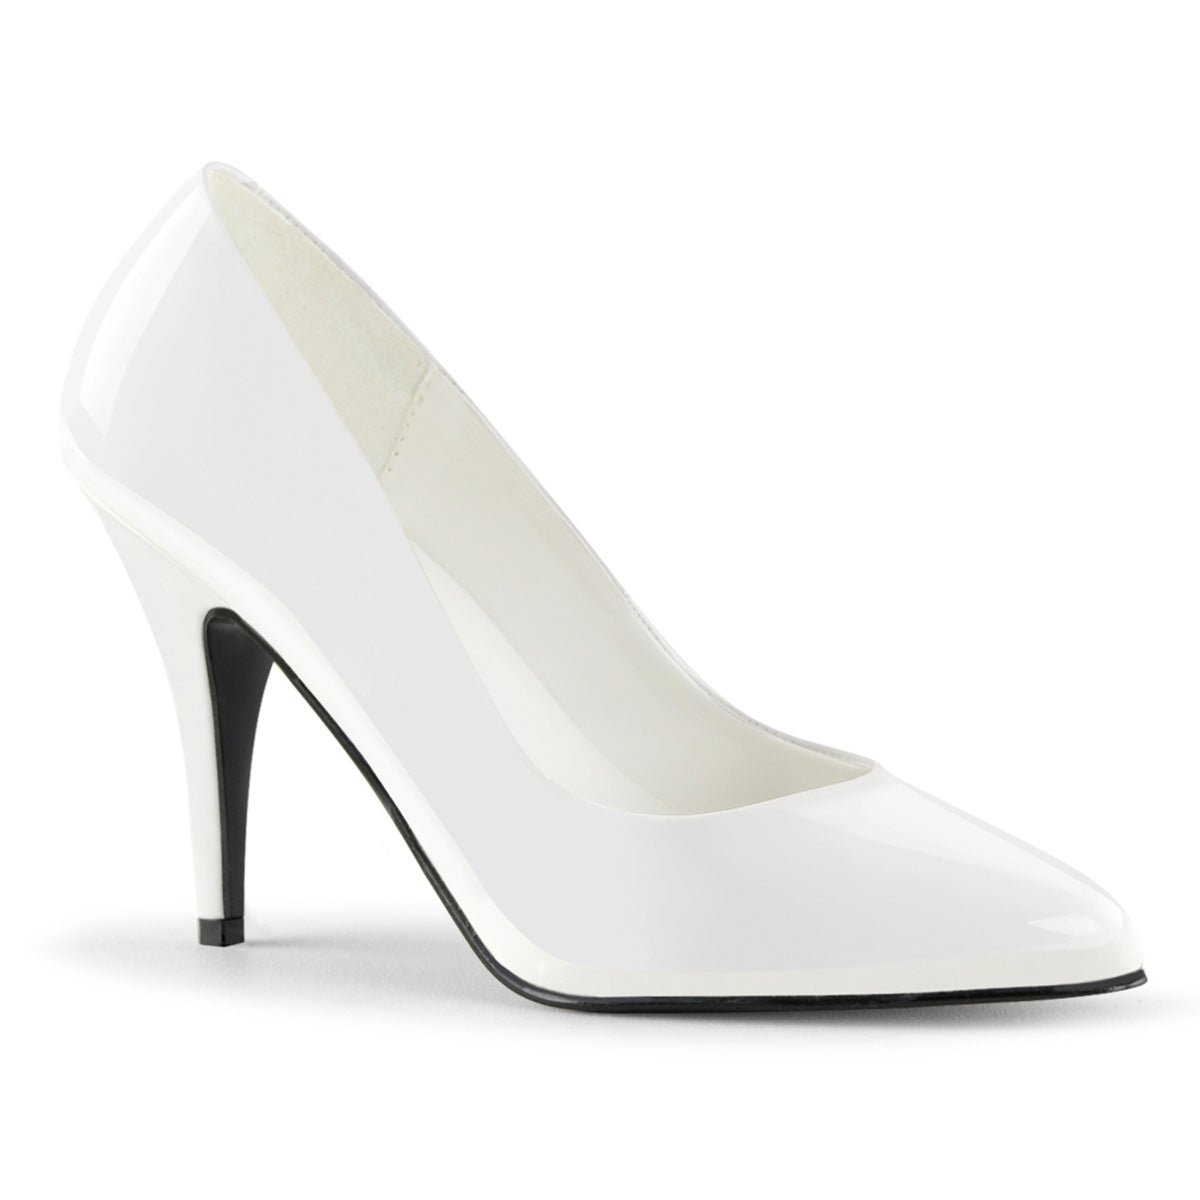 Pleaser Vanity 420 White - Model Express VancouverShoes